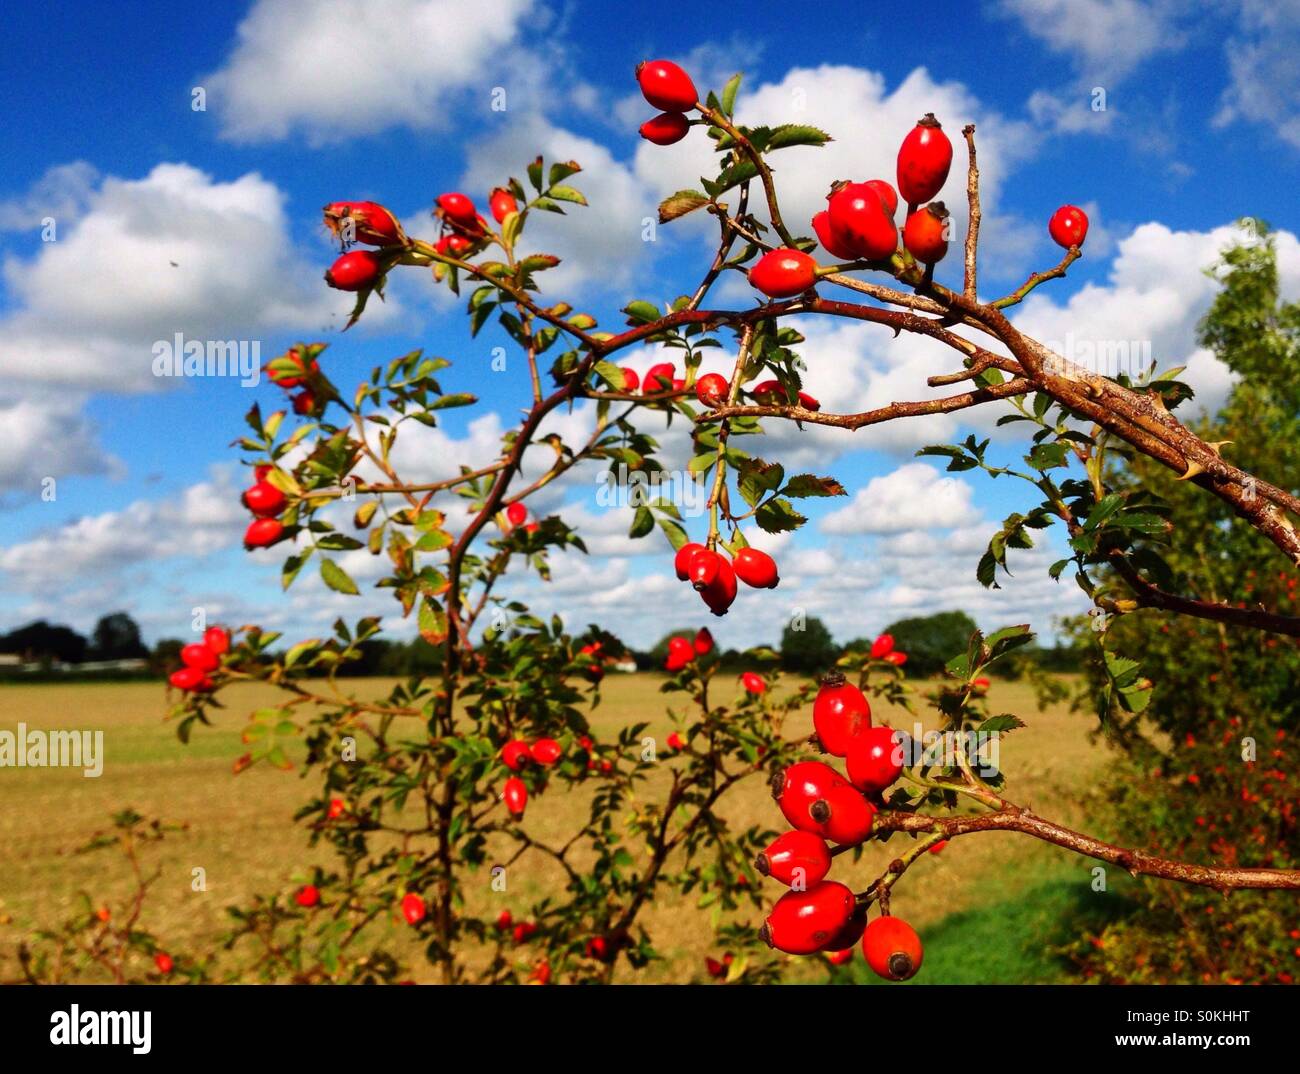 Branch of dog rose Rosa canina with red hips in the Autumn (fall) sunshine. Rose hips are used to make syrup which is edible and high in Vitamin C. Stock Photo